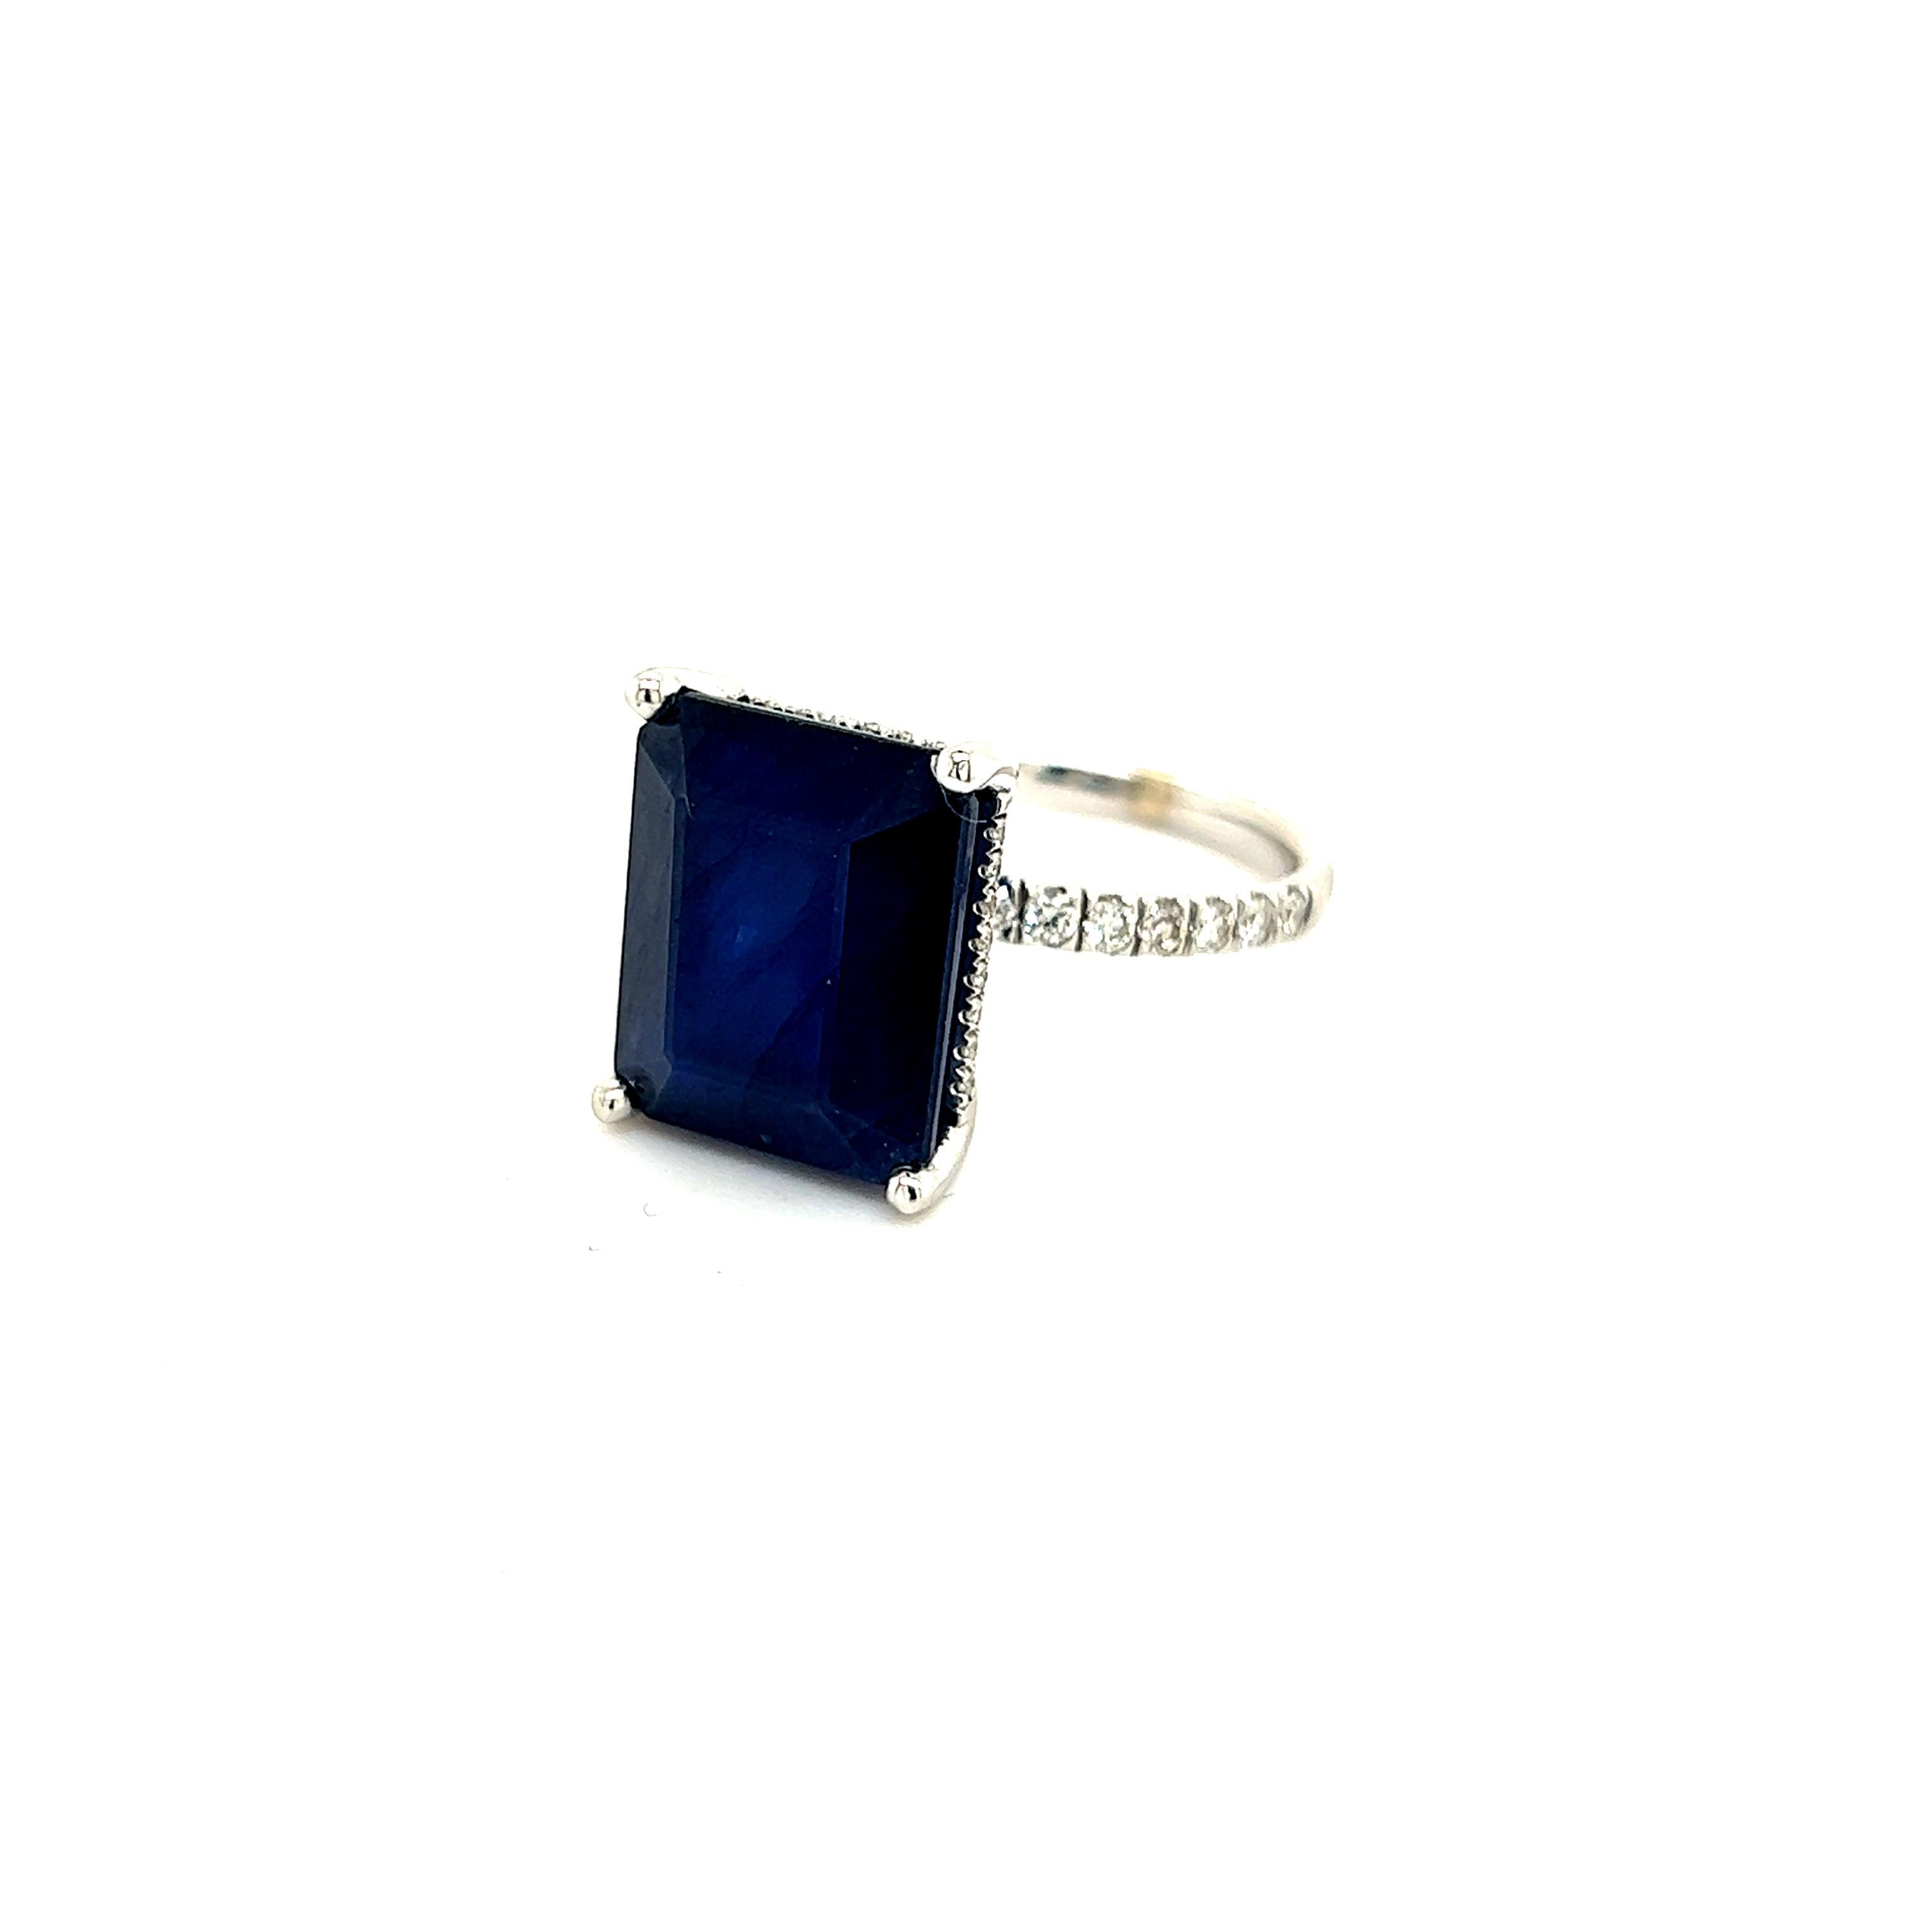 Sapphire Diamond Ring 14k Y Gold 12.05 TCW Certified For Sale 1